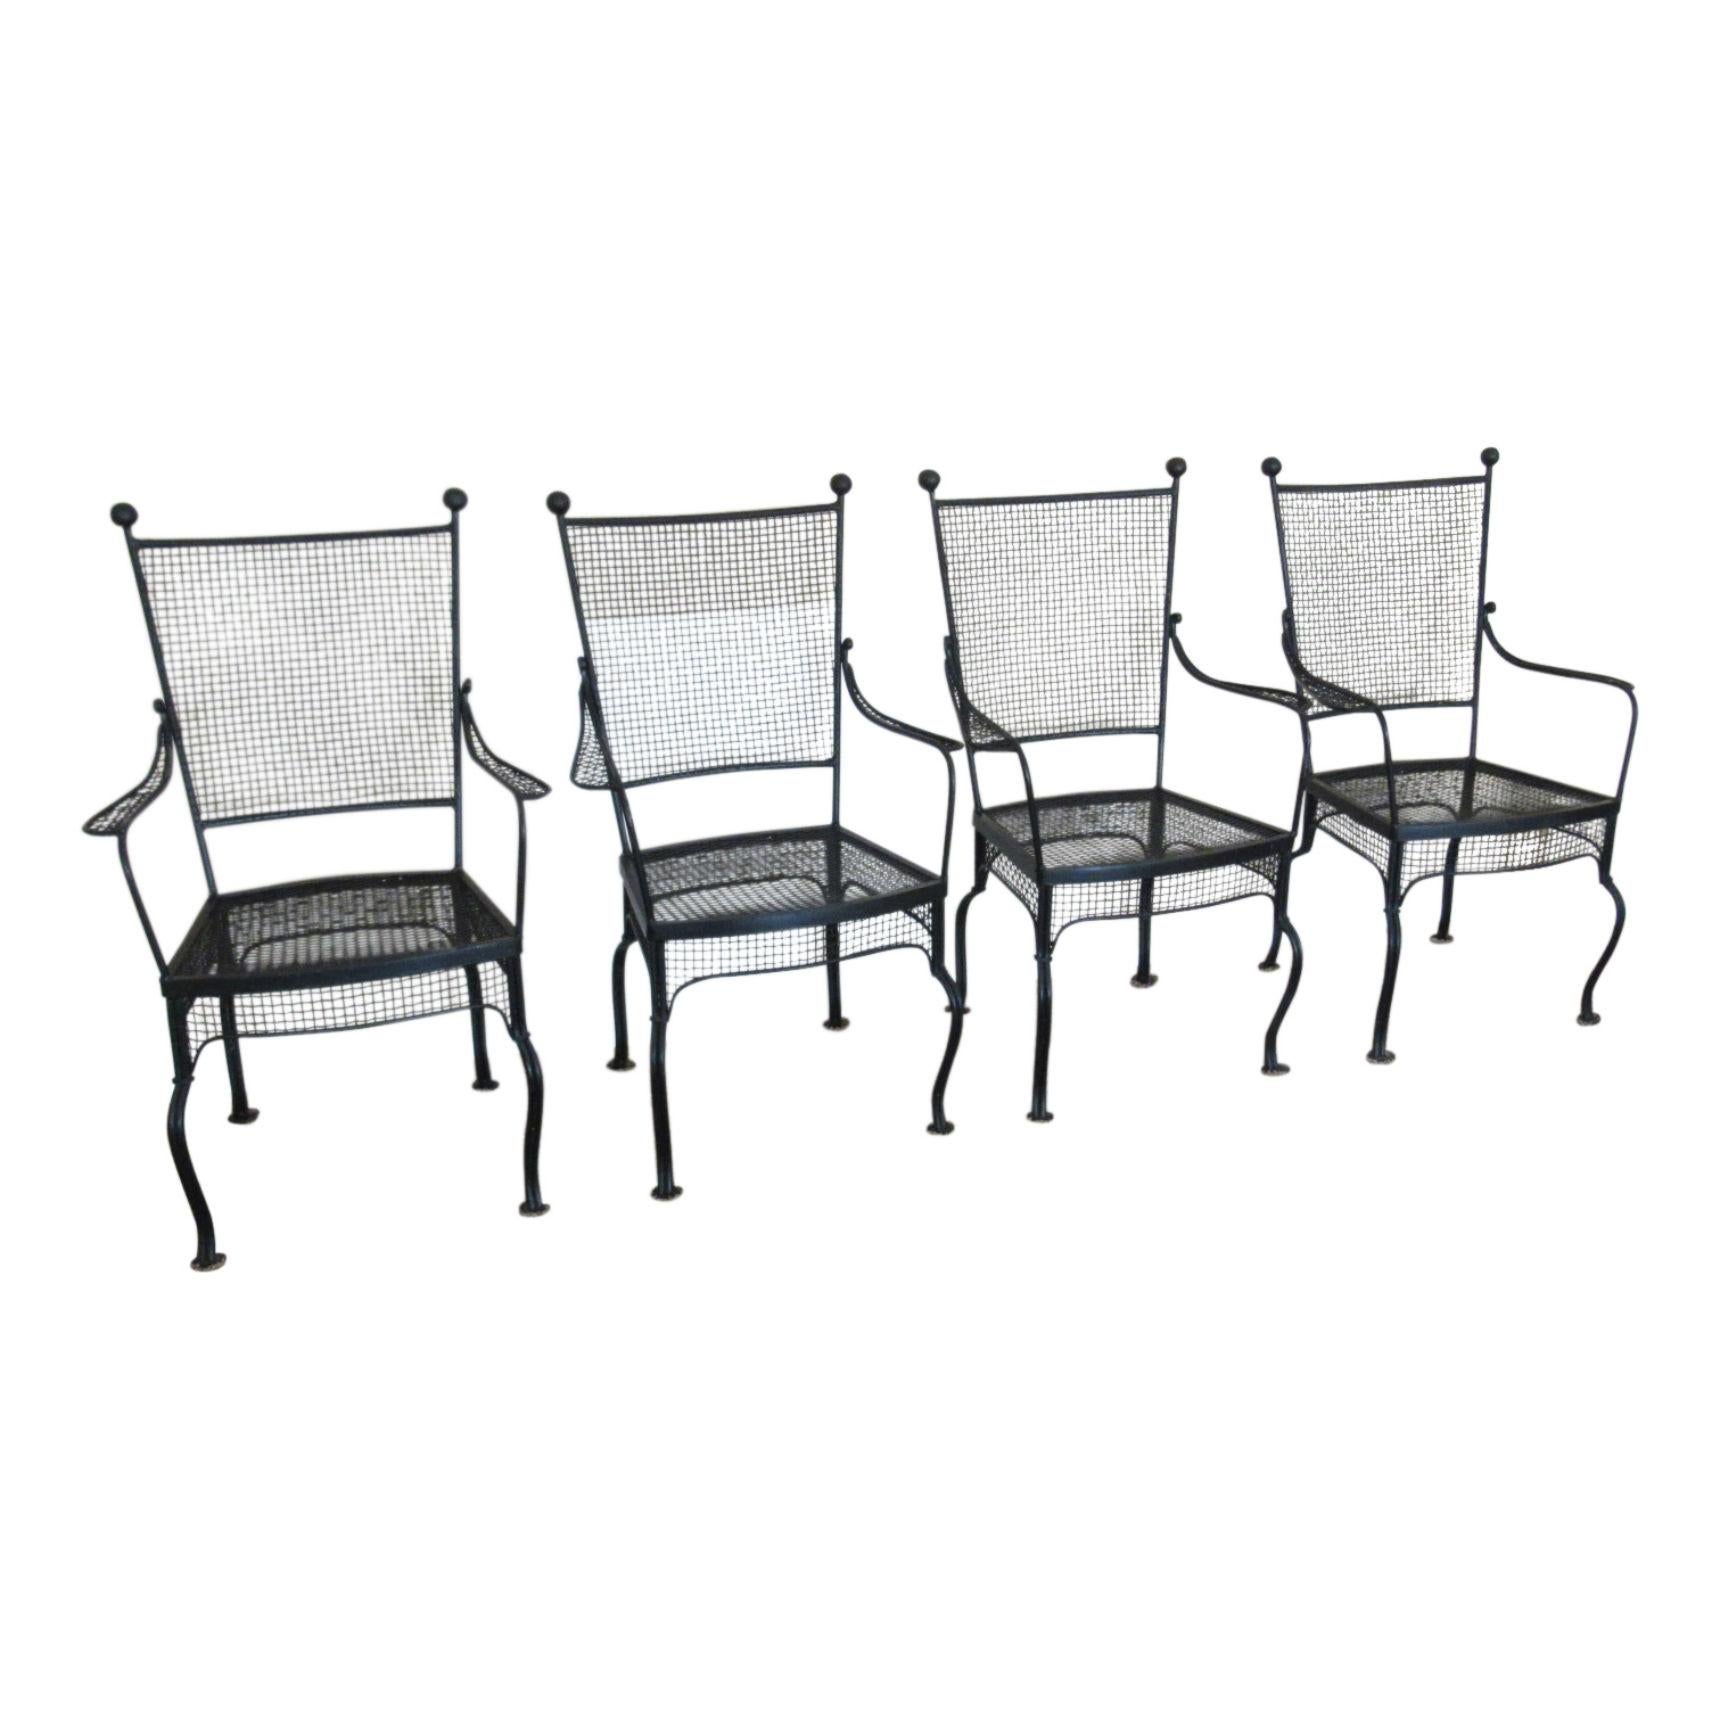 Mid-Century Modern table and four chairs design attributed to Salterini, Italian, circa 1950s. Four high back chairs composed of wrought iron with matching wrought iron patio dining table. In very good original condition.

Measures: Table 41.5”